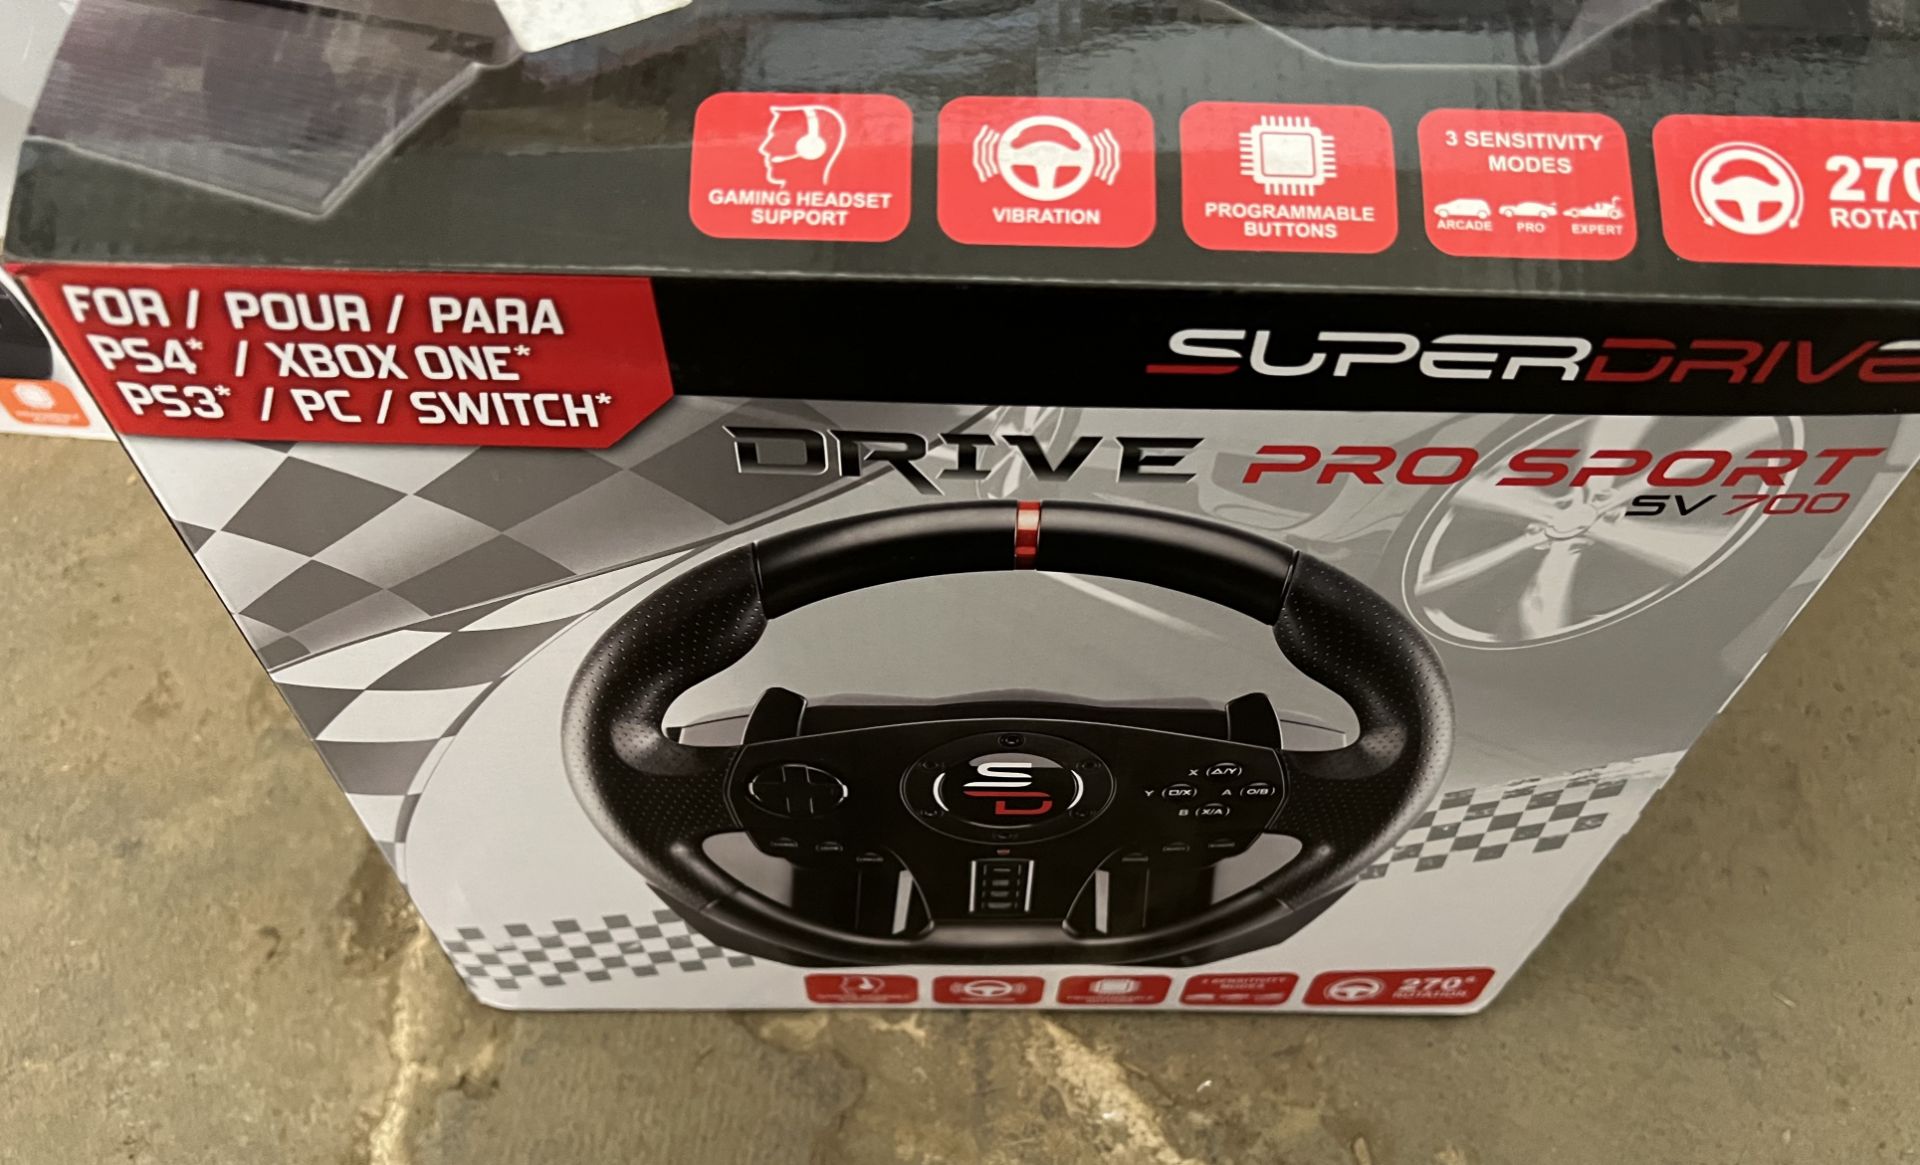 RAW RETURN -SUBSONIC SV700 Drive Pro Sport Wheel & Pedals -PS4/PS3/XBOX ONE/PC/SWITCH -RRP NEW £100+